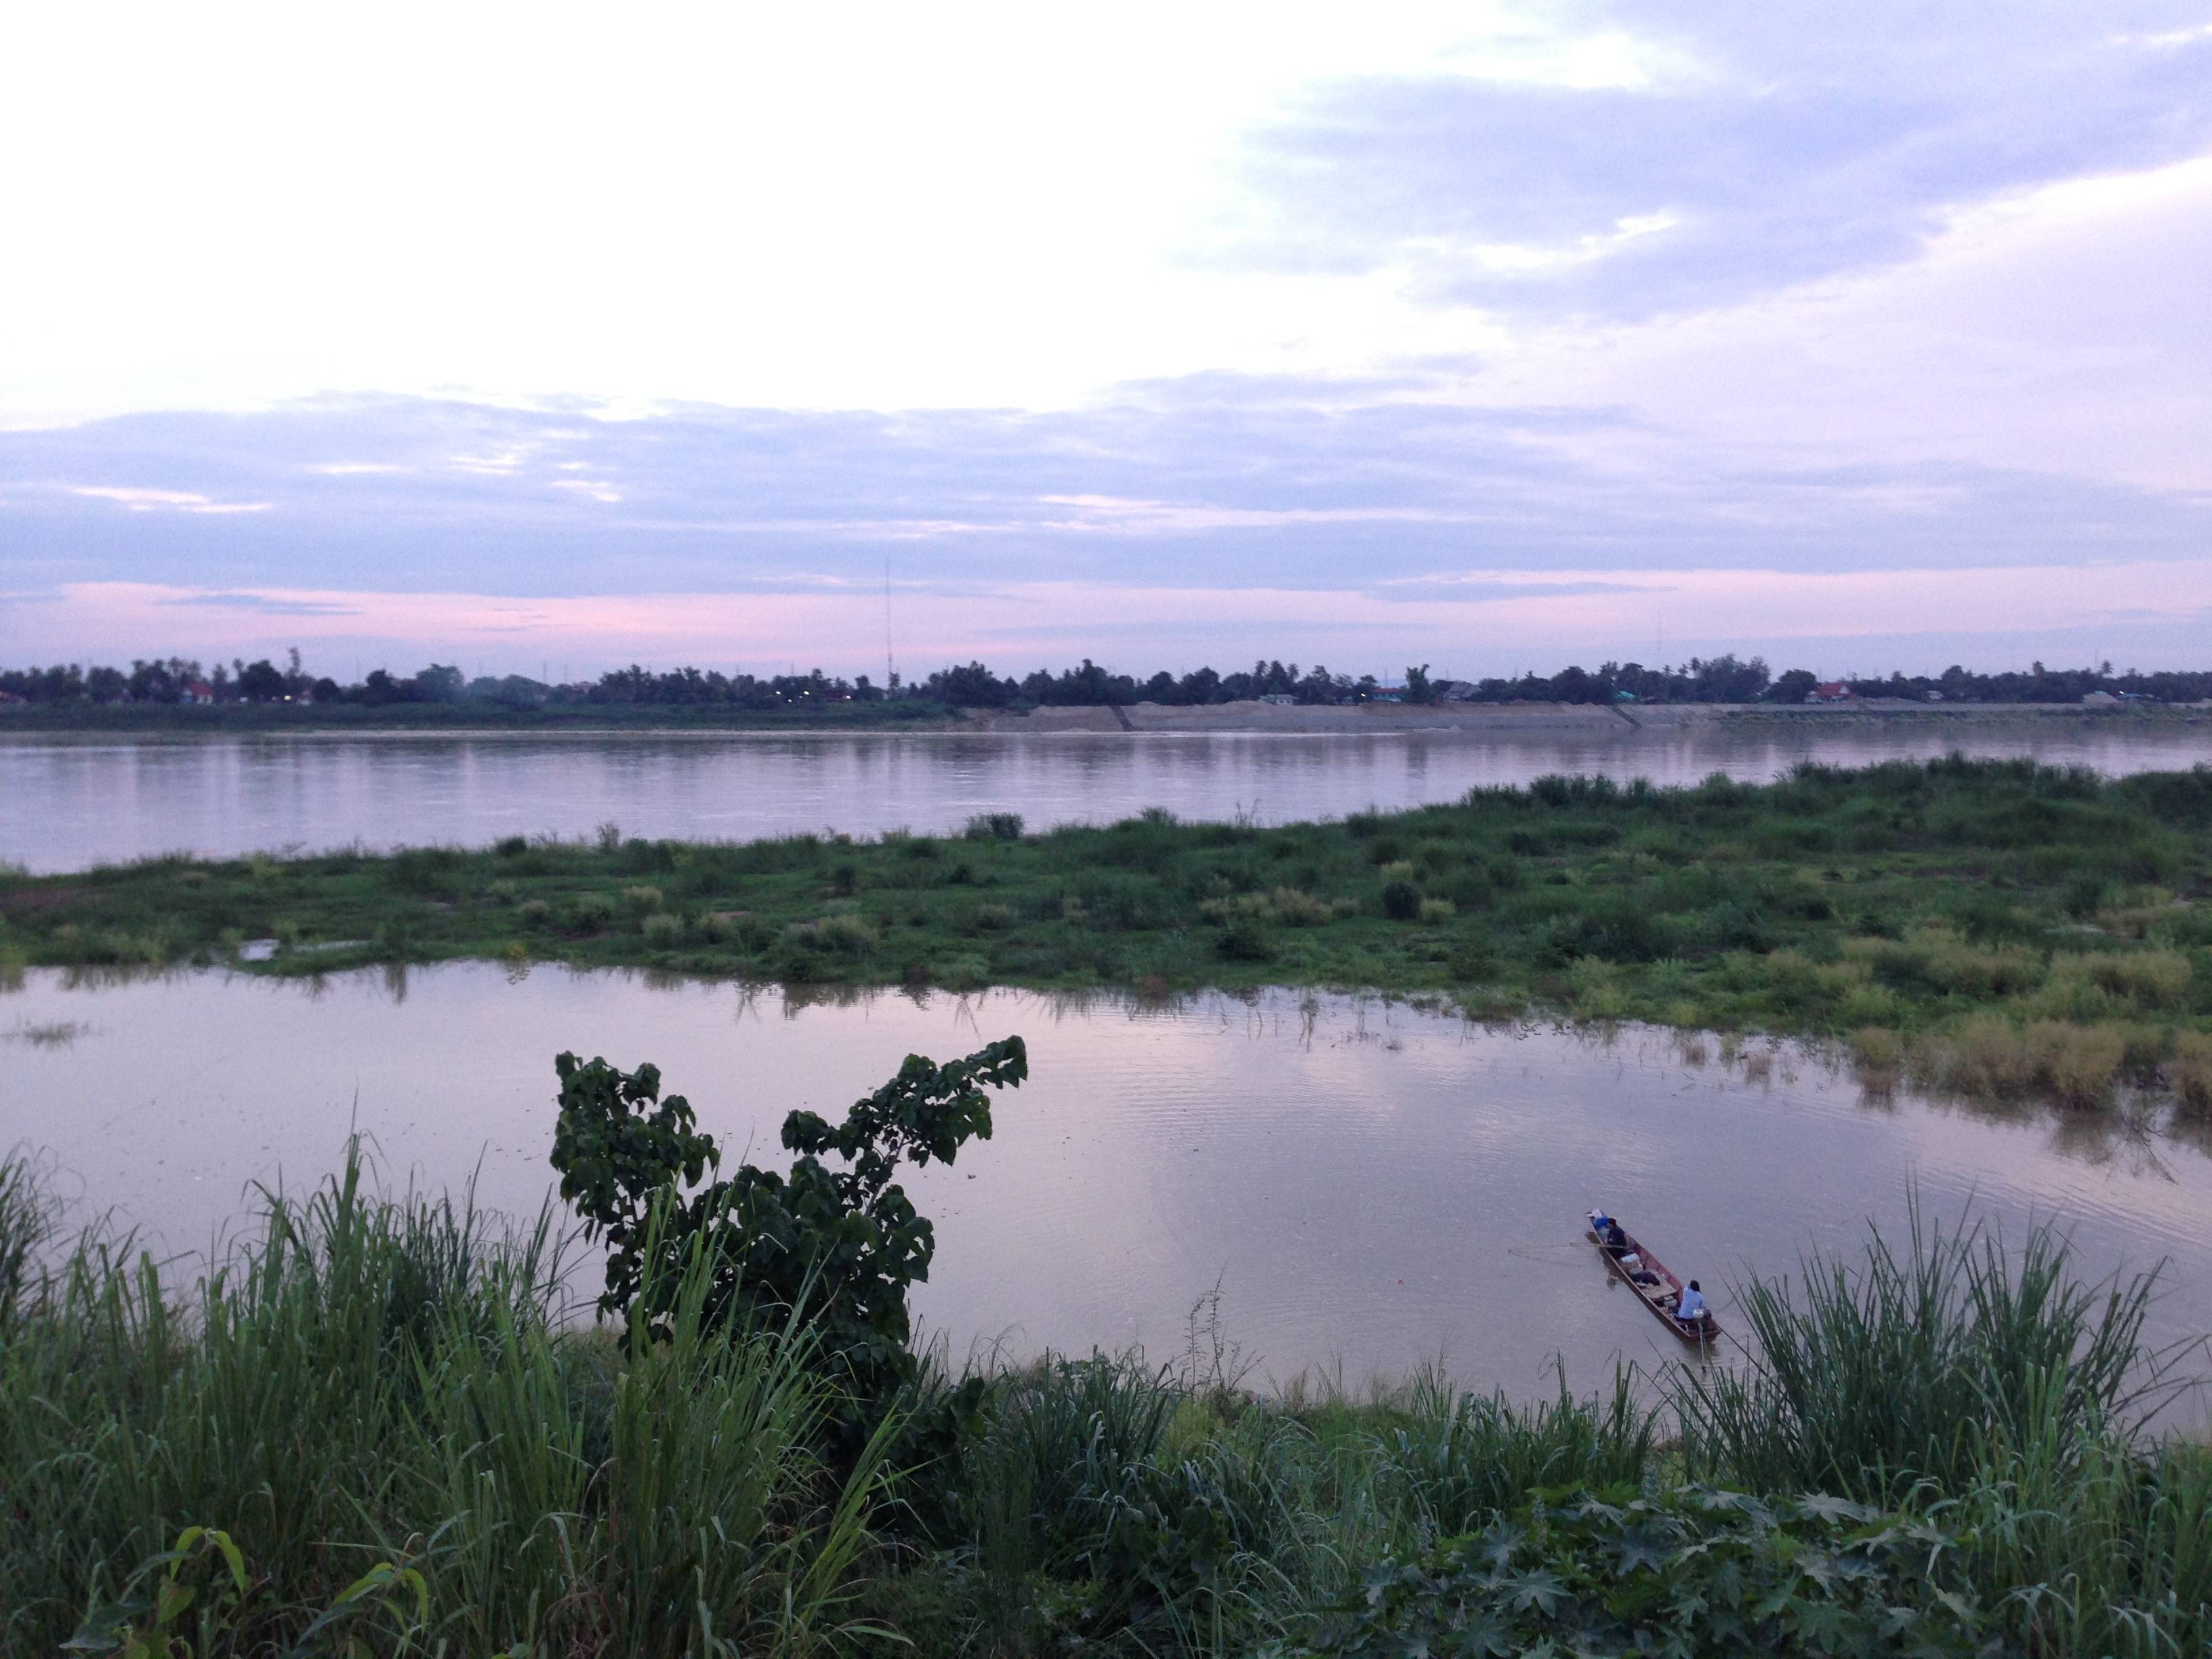 Fish species are in decline in the Mekong Basin